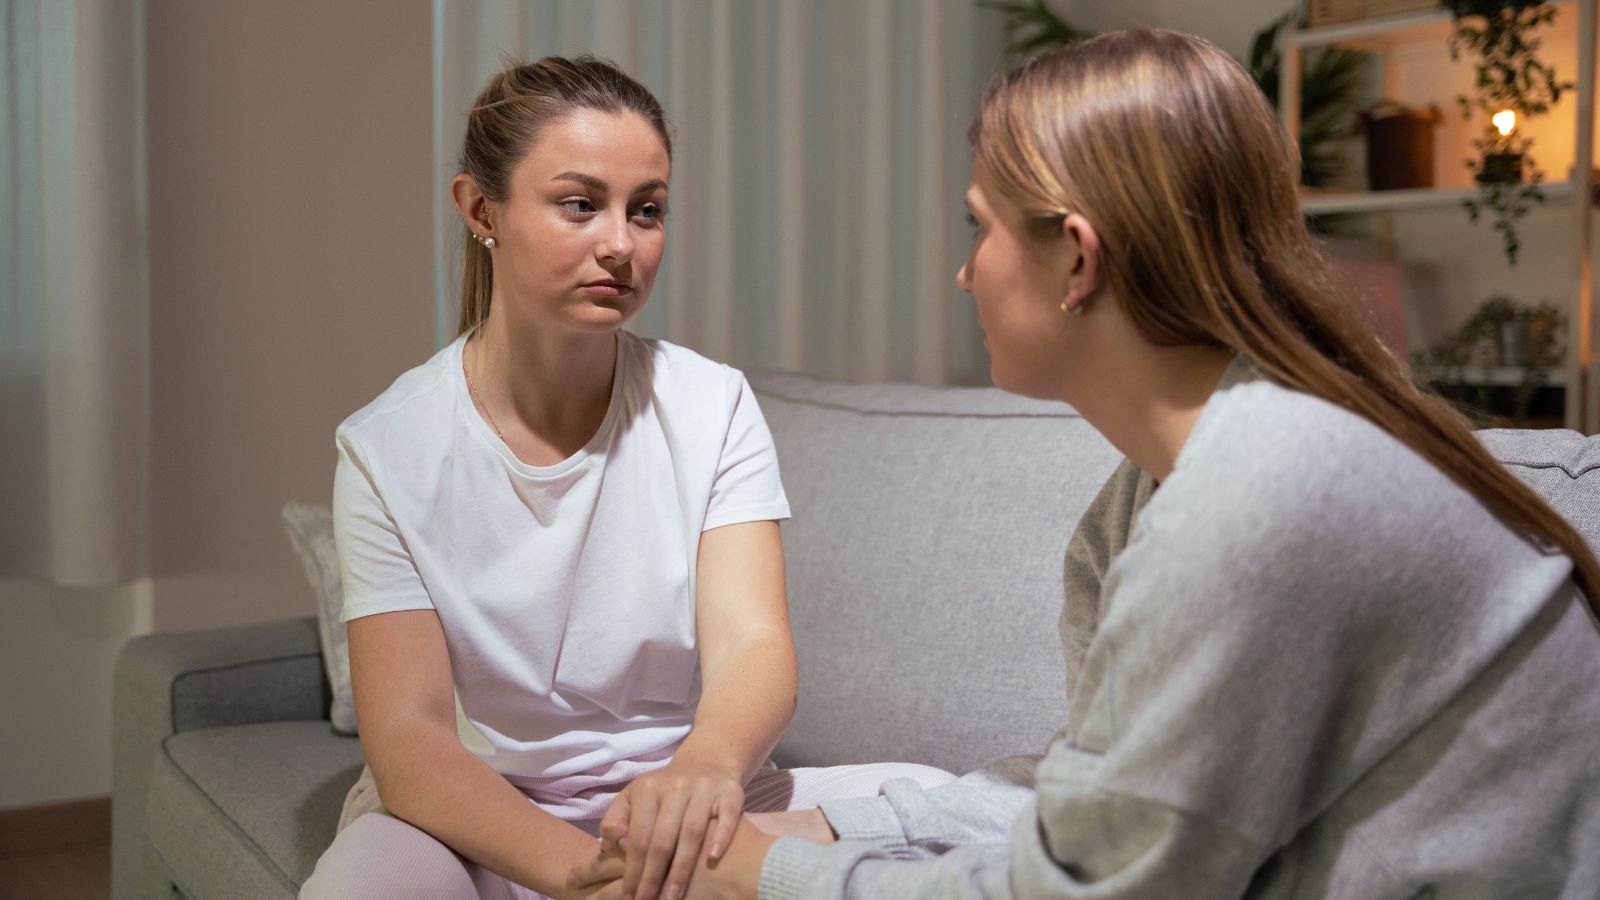 <p>It's not common for narcissists to genuinely apologize. So you won't hear the words "I'm sorry for what I did" from a narcissist anytime soon. They tend to avoid saying sorry for their actions because it might make them seem less in control. They usually only apologize if they see a personal benefit.</p>